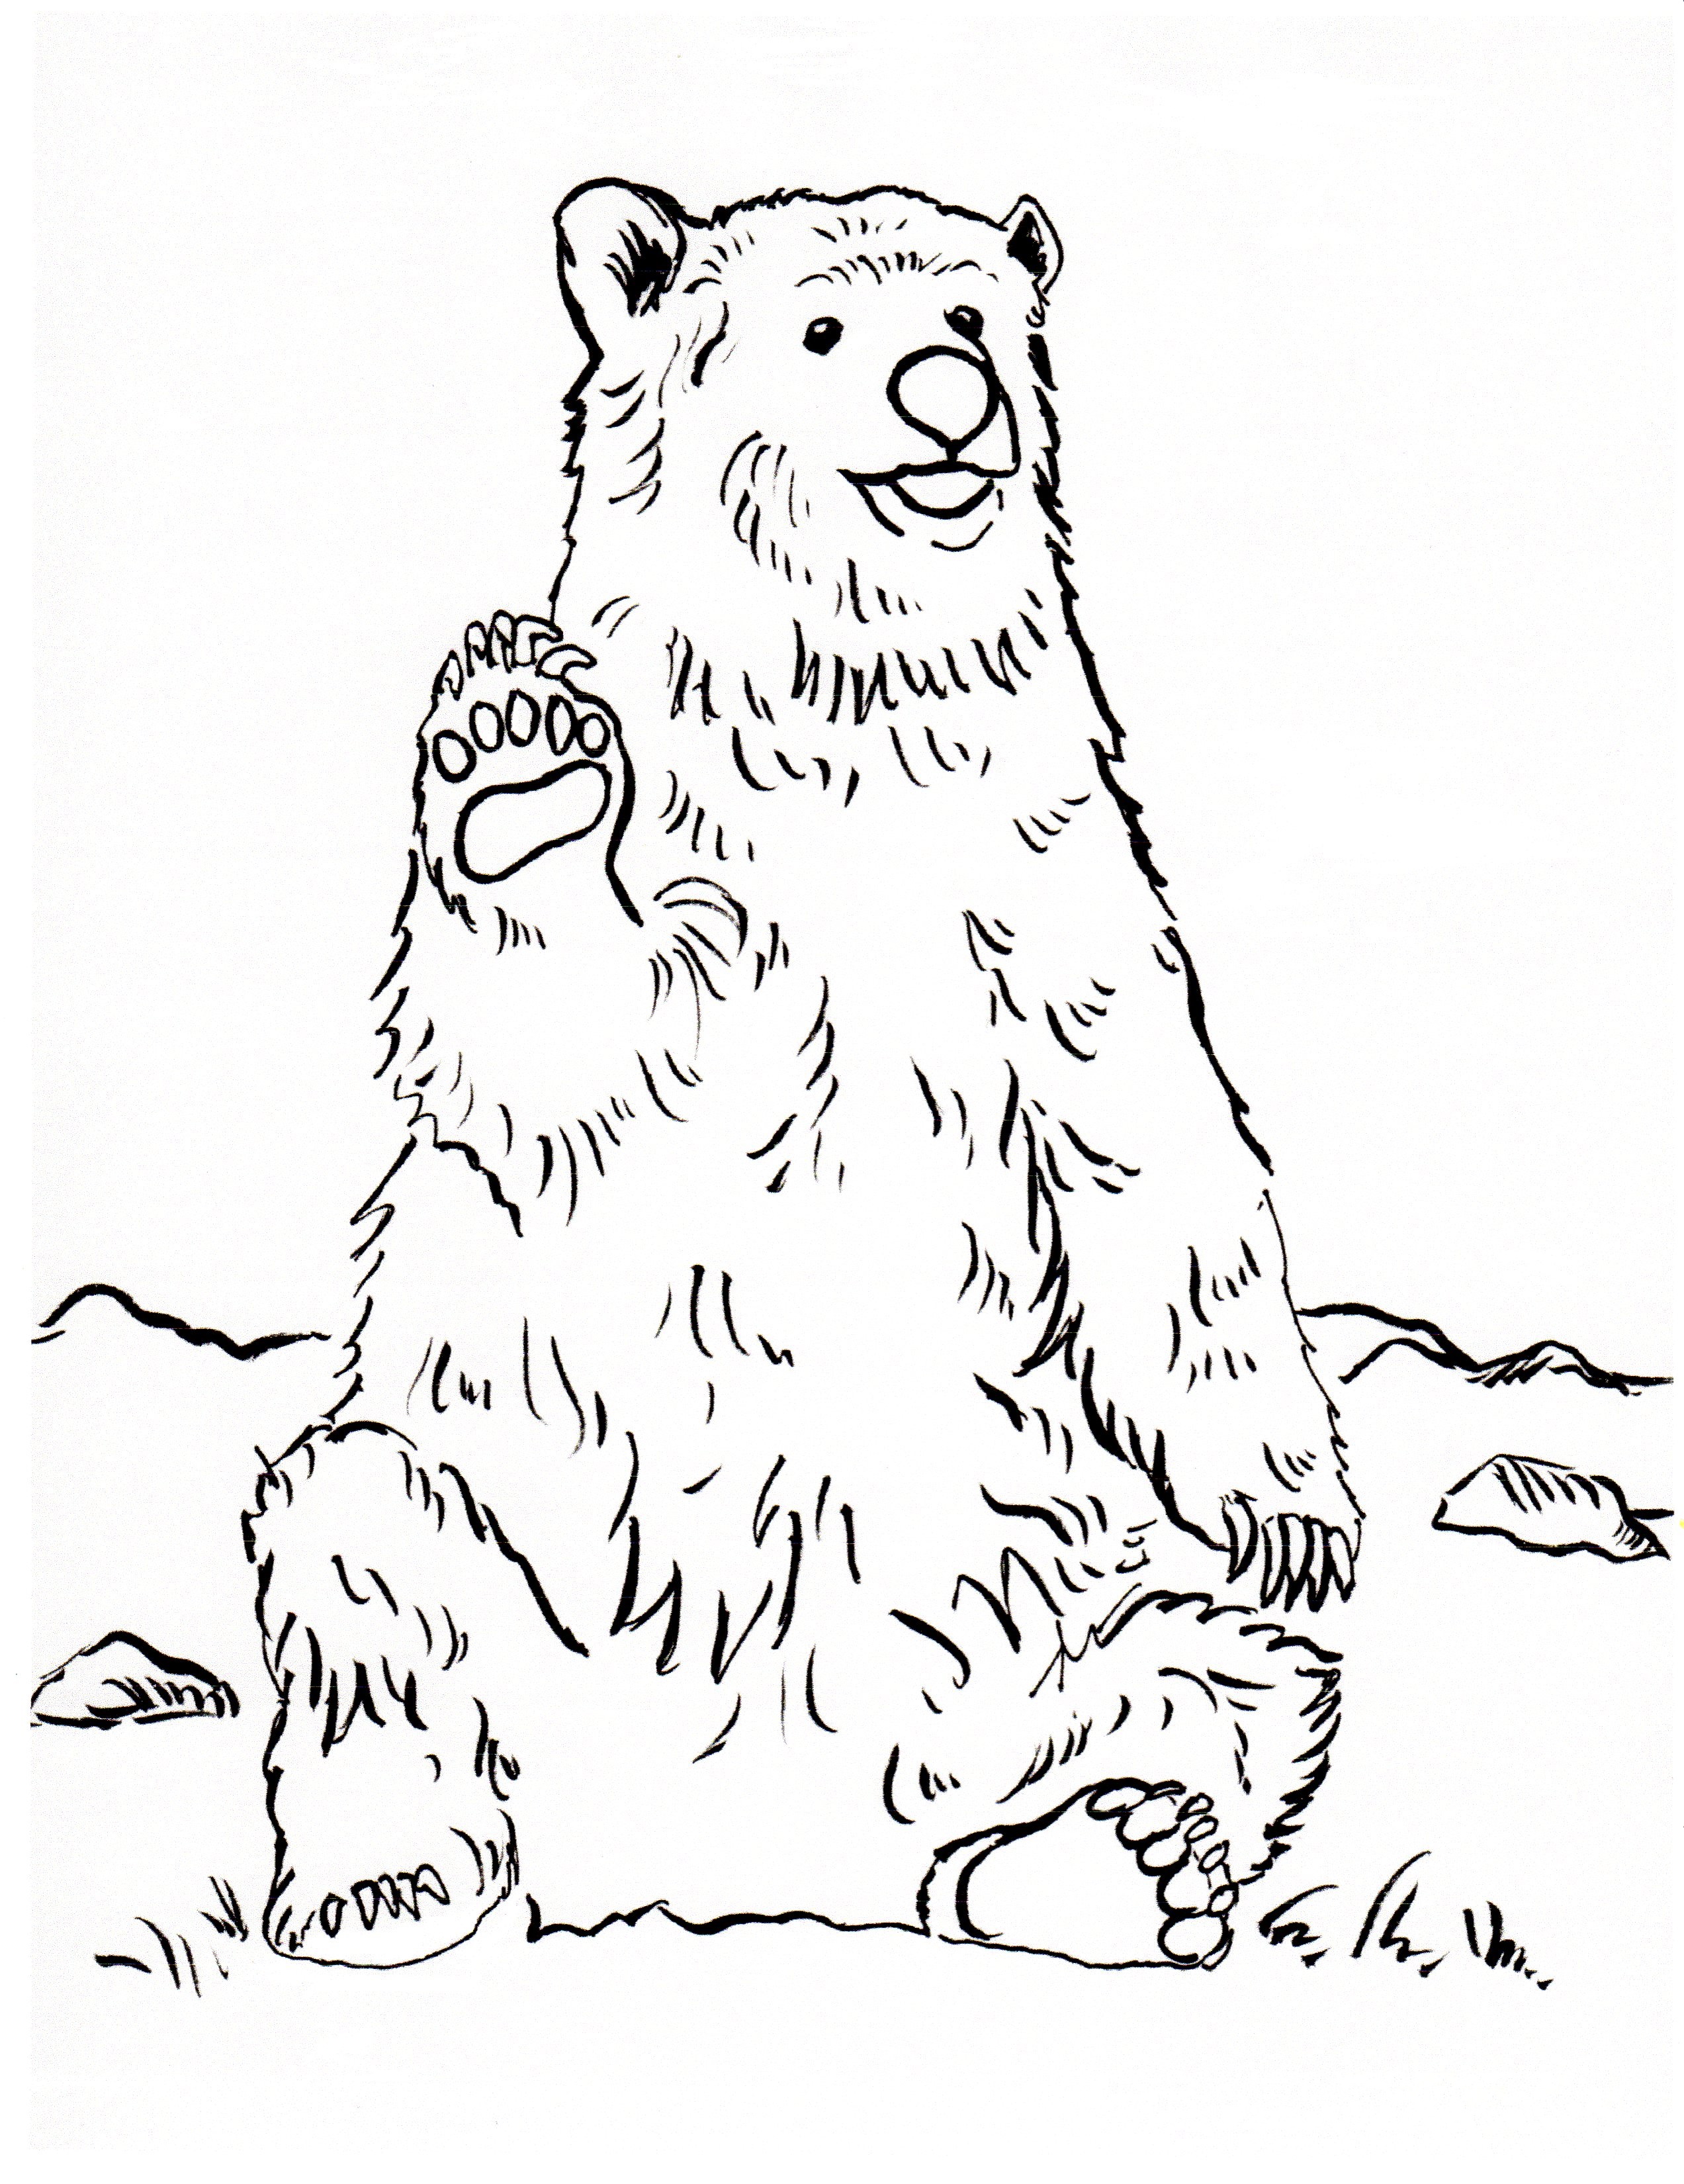 Printable Bear Coloring Pages